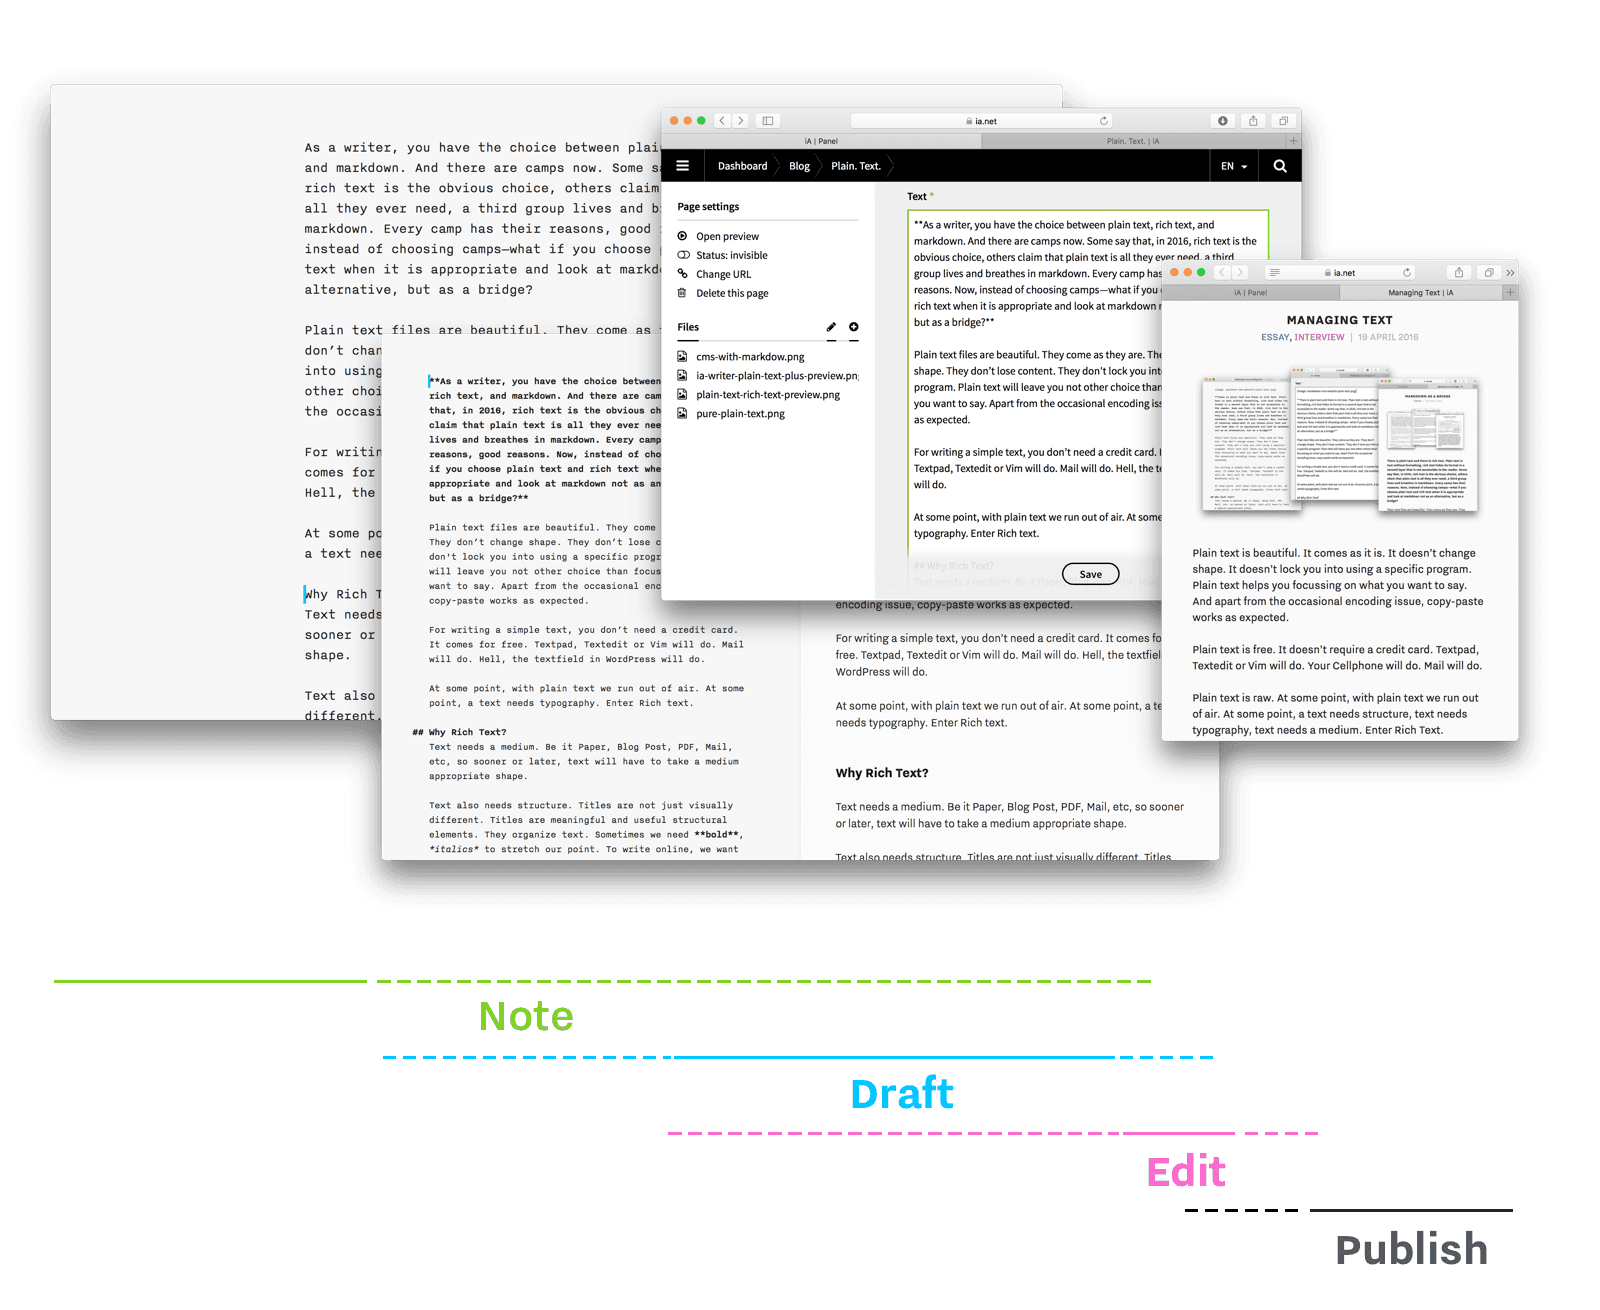 workflow-note-draft-edit-publish.png